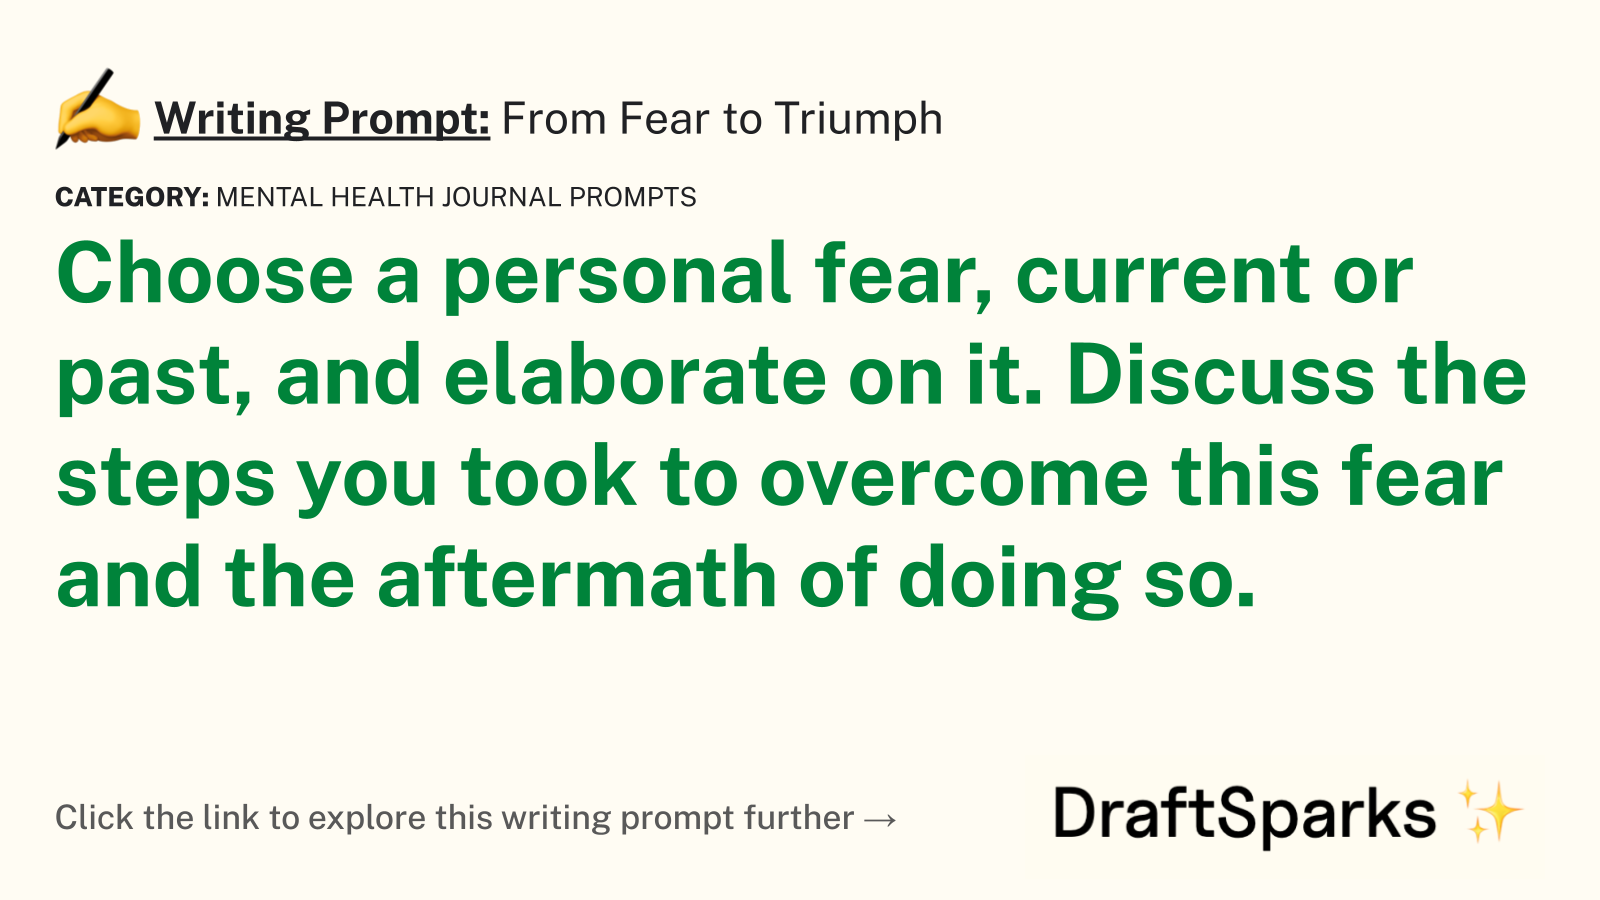 From Fear to Triumph